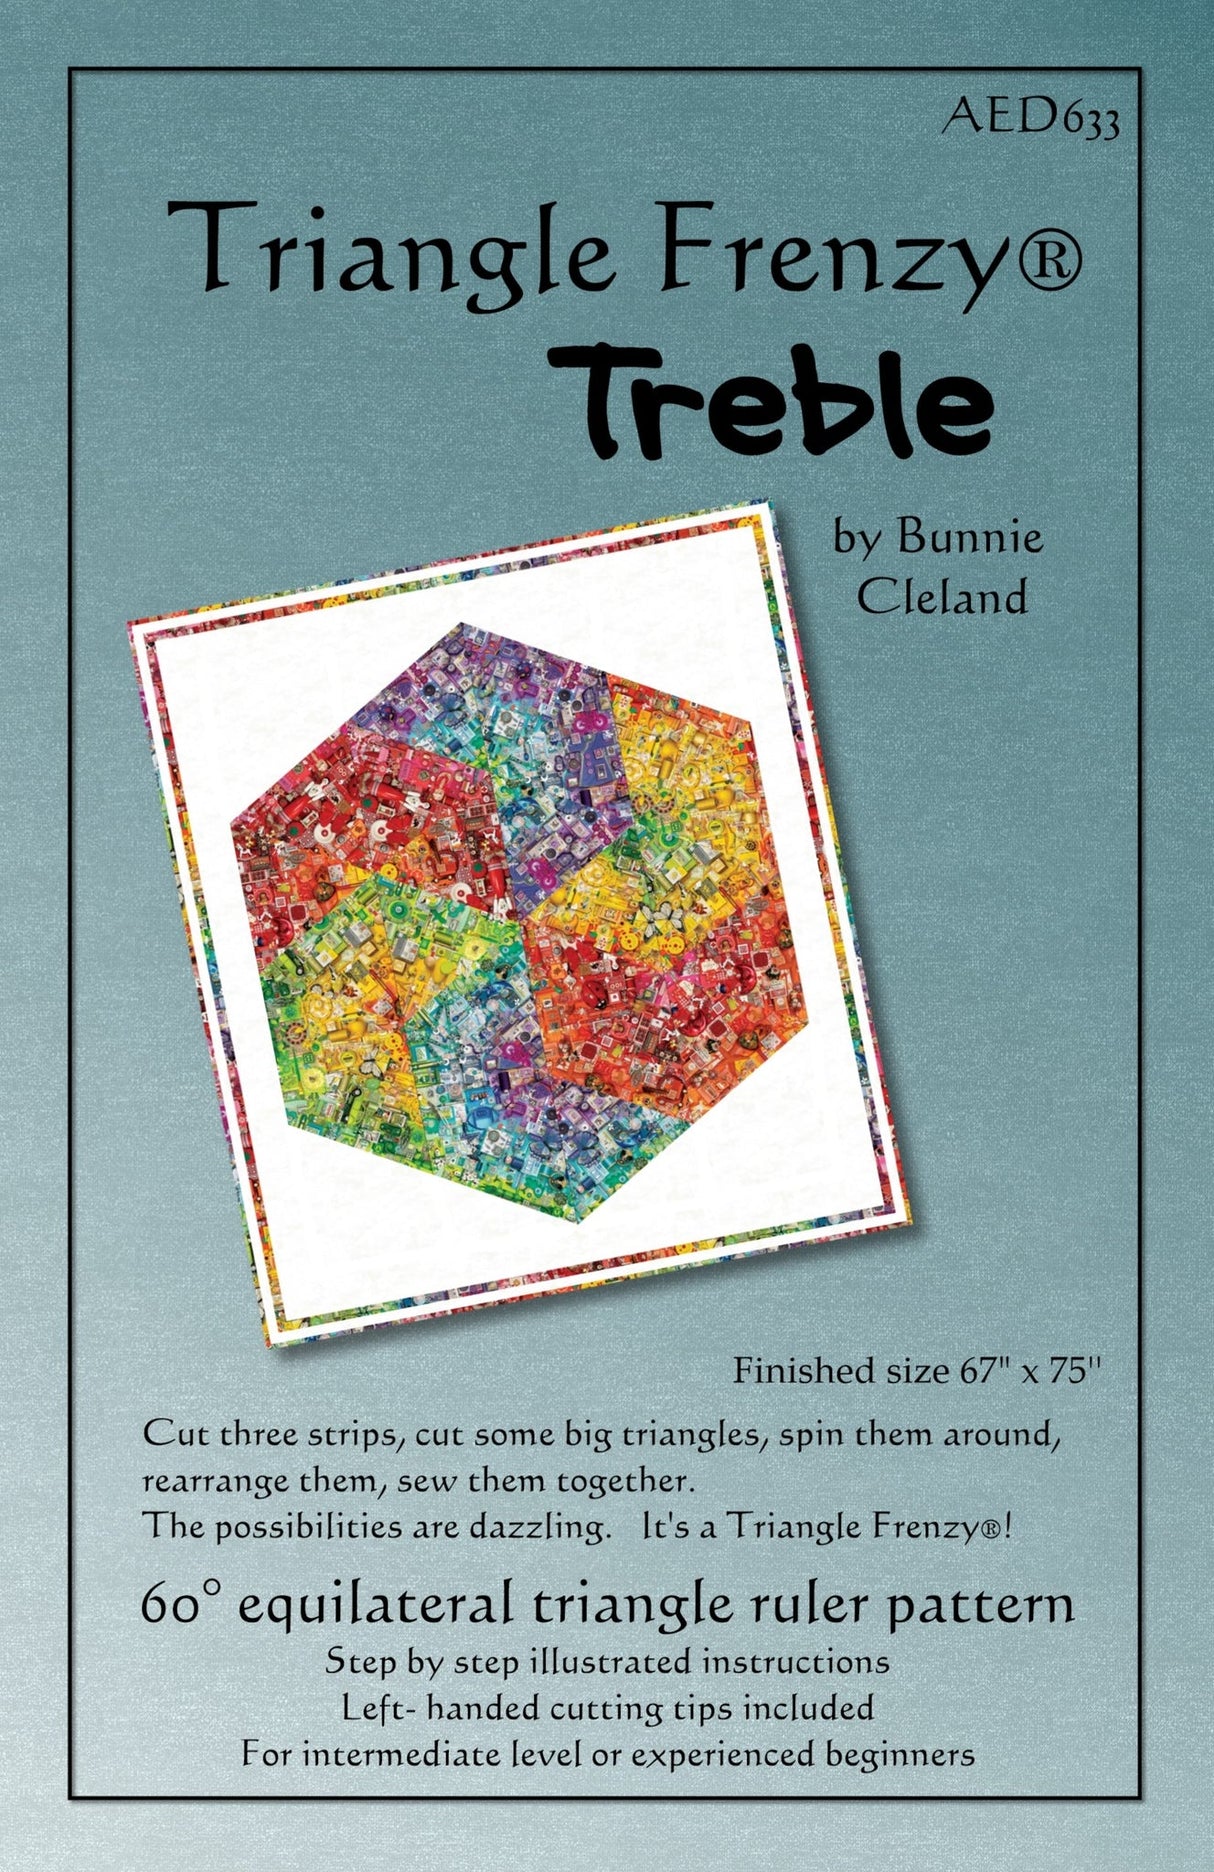 Treble Quilt Pattern by Triangle Frenzy